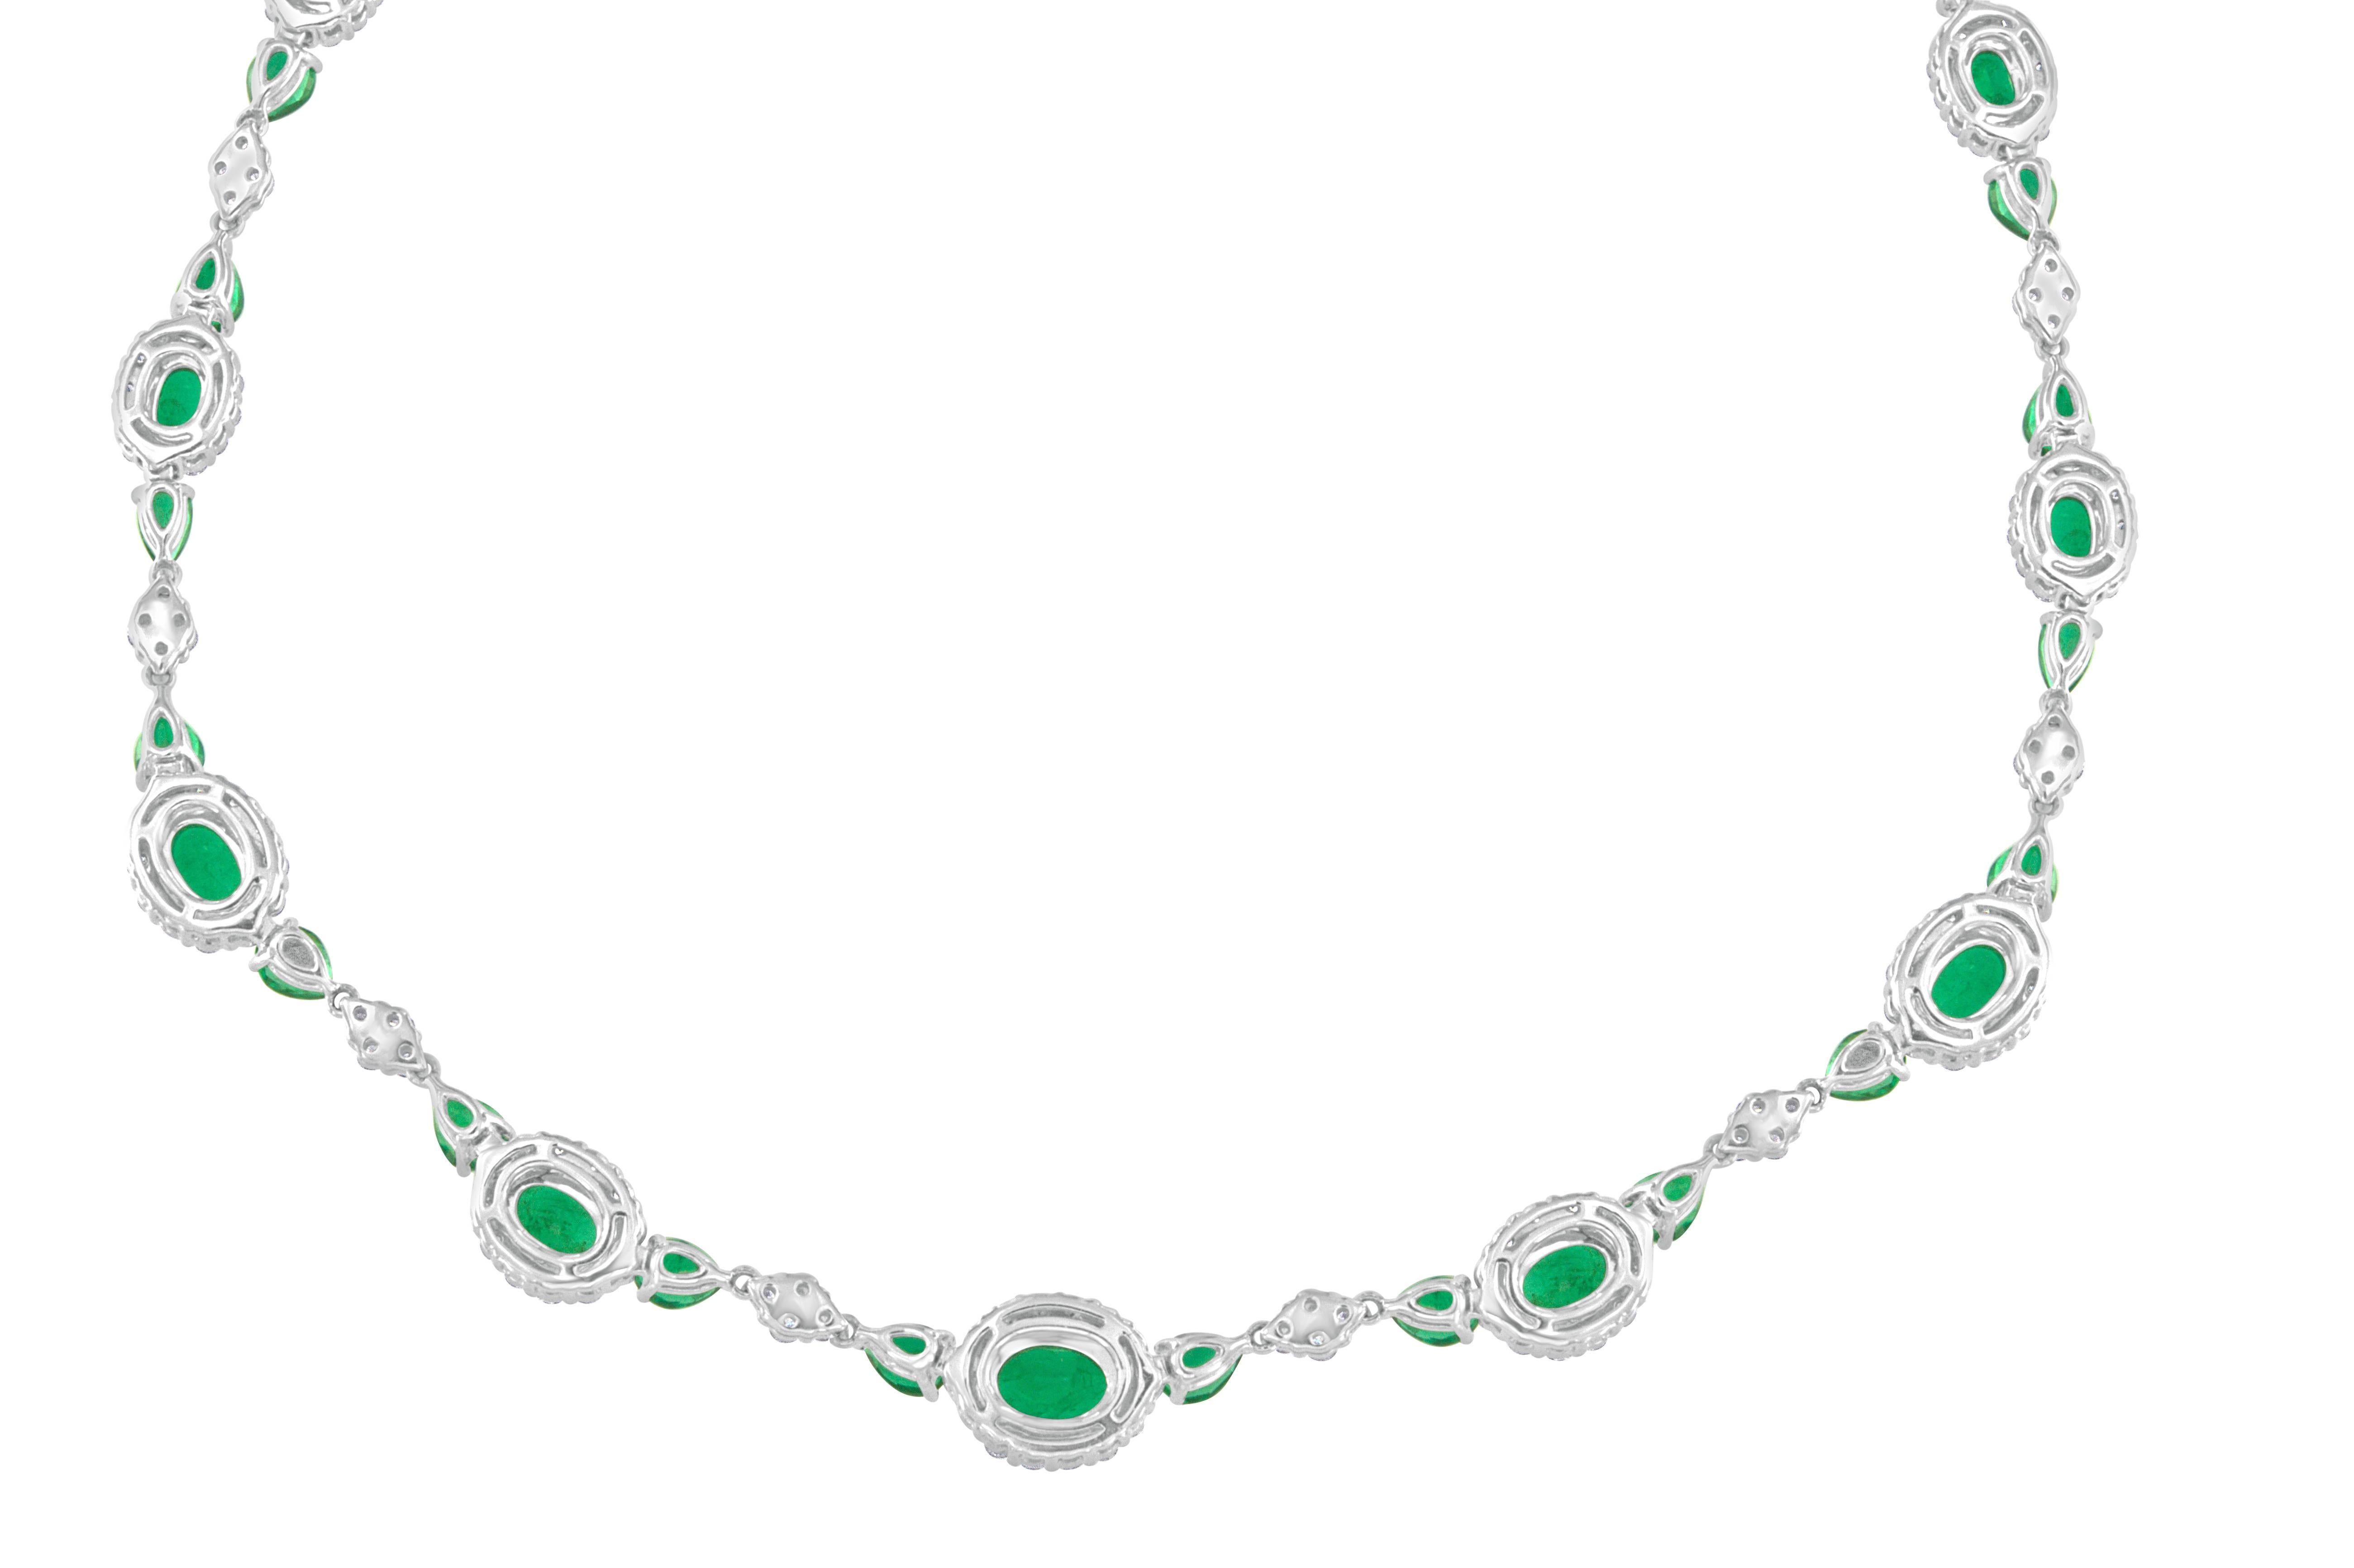 The extraordinary emerald and diamond 18 karat white gold necklace features 49- oval and pear shape emeralds weighing 14.85 carats total, having very fine color and cut. Set with 258- round brilliant cut diamonds weighing 5.00 carats totals, having